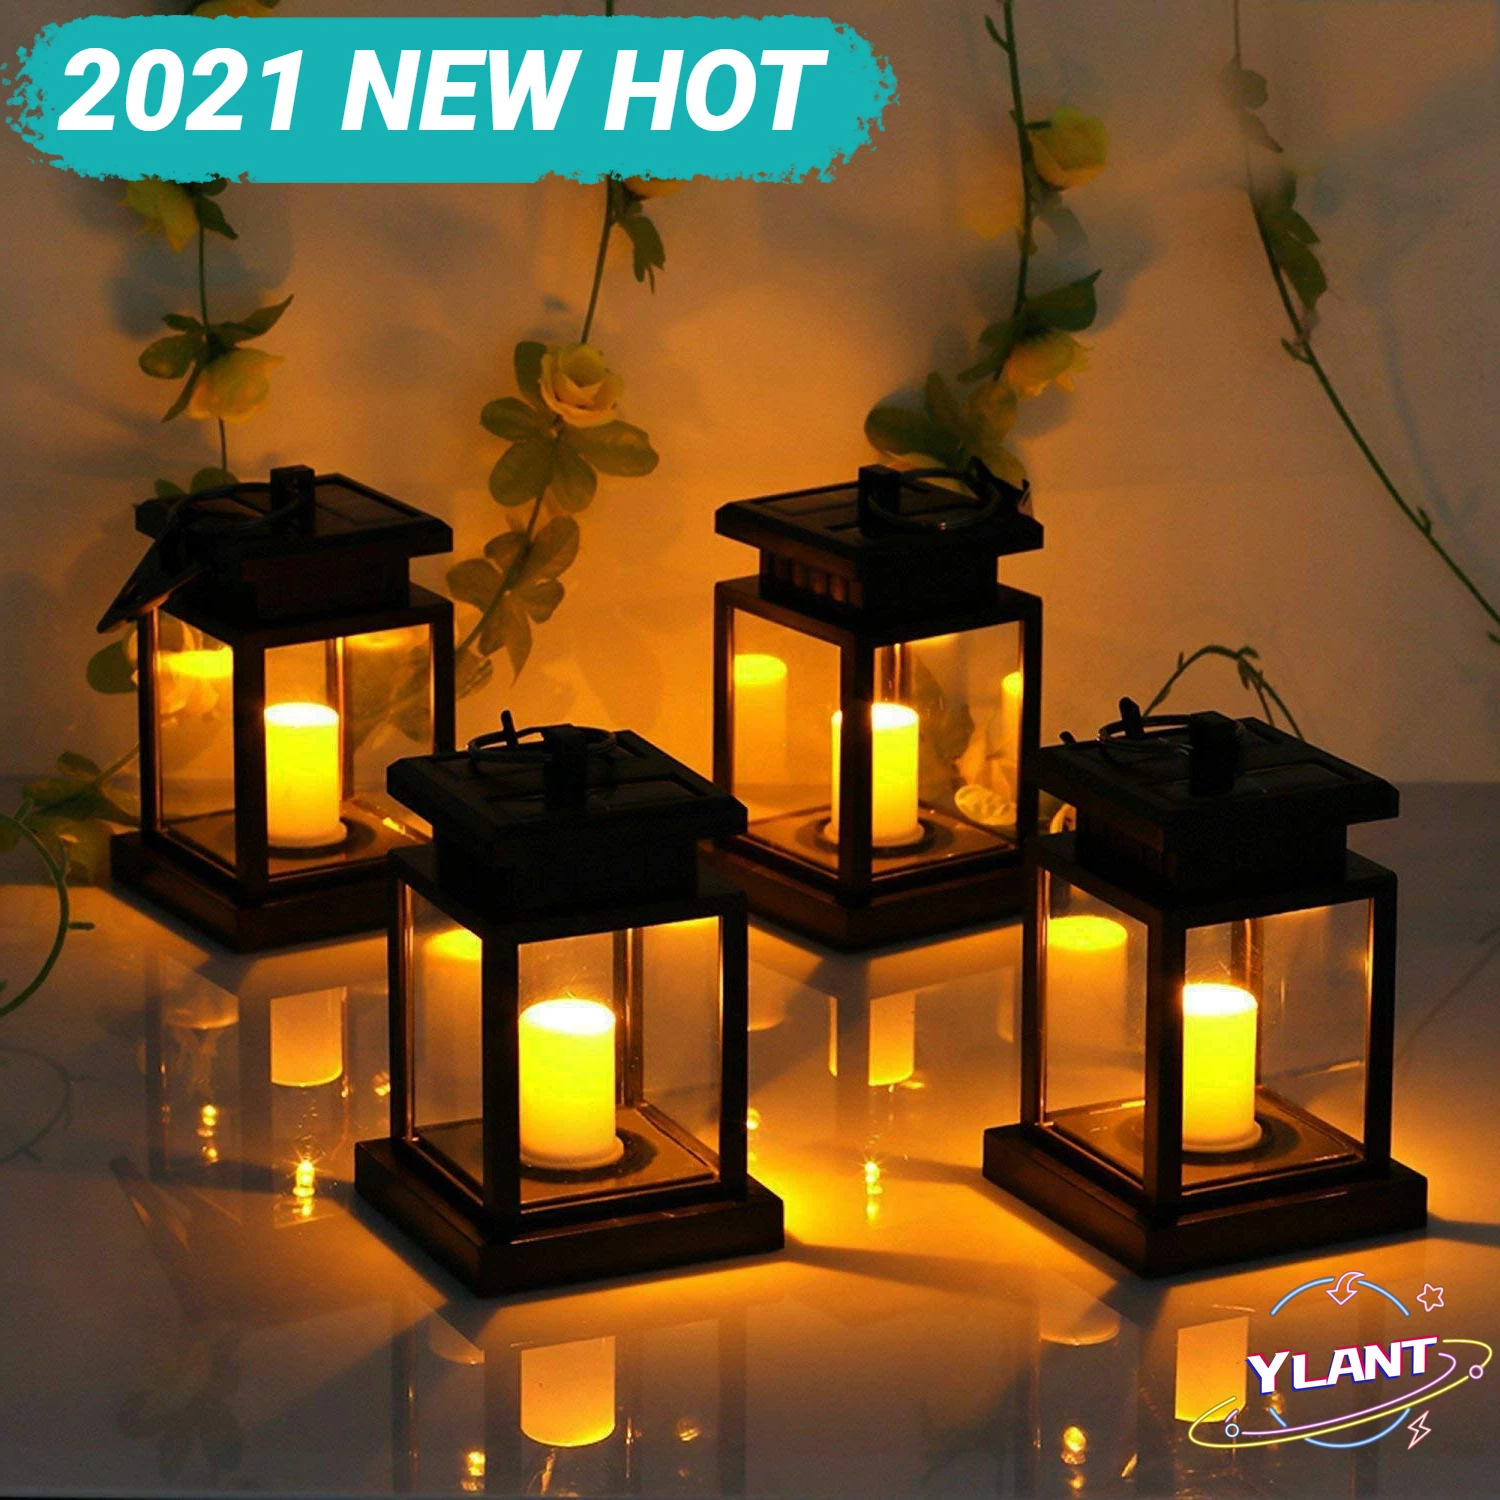 

YLANT Solar Powered LED Outdoor twinkle Candle Lantern Outdoor Lamp Home Garden Decoration Light Warm Flame Flashing Tea Light